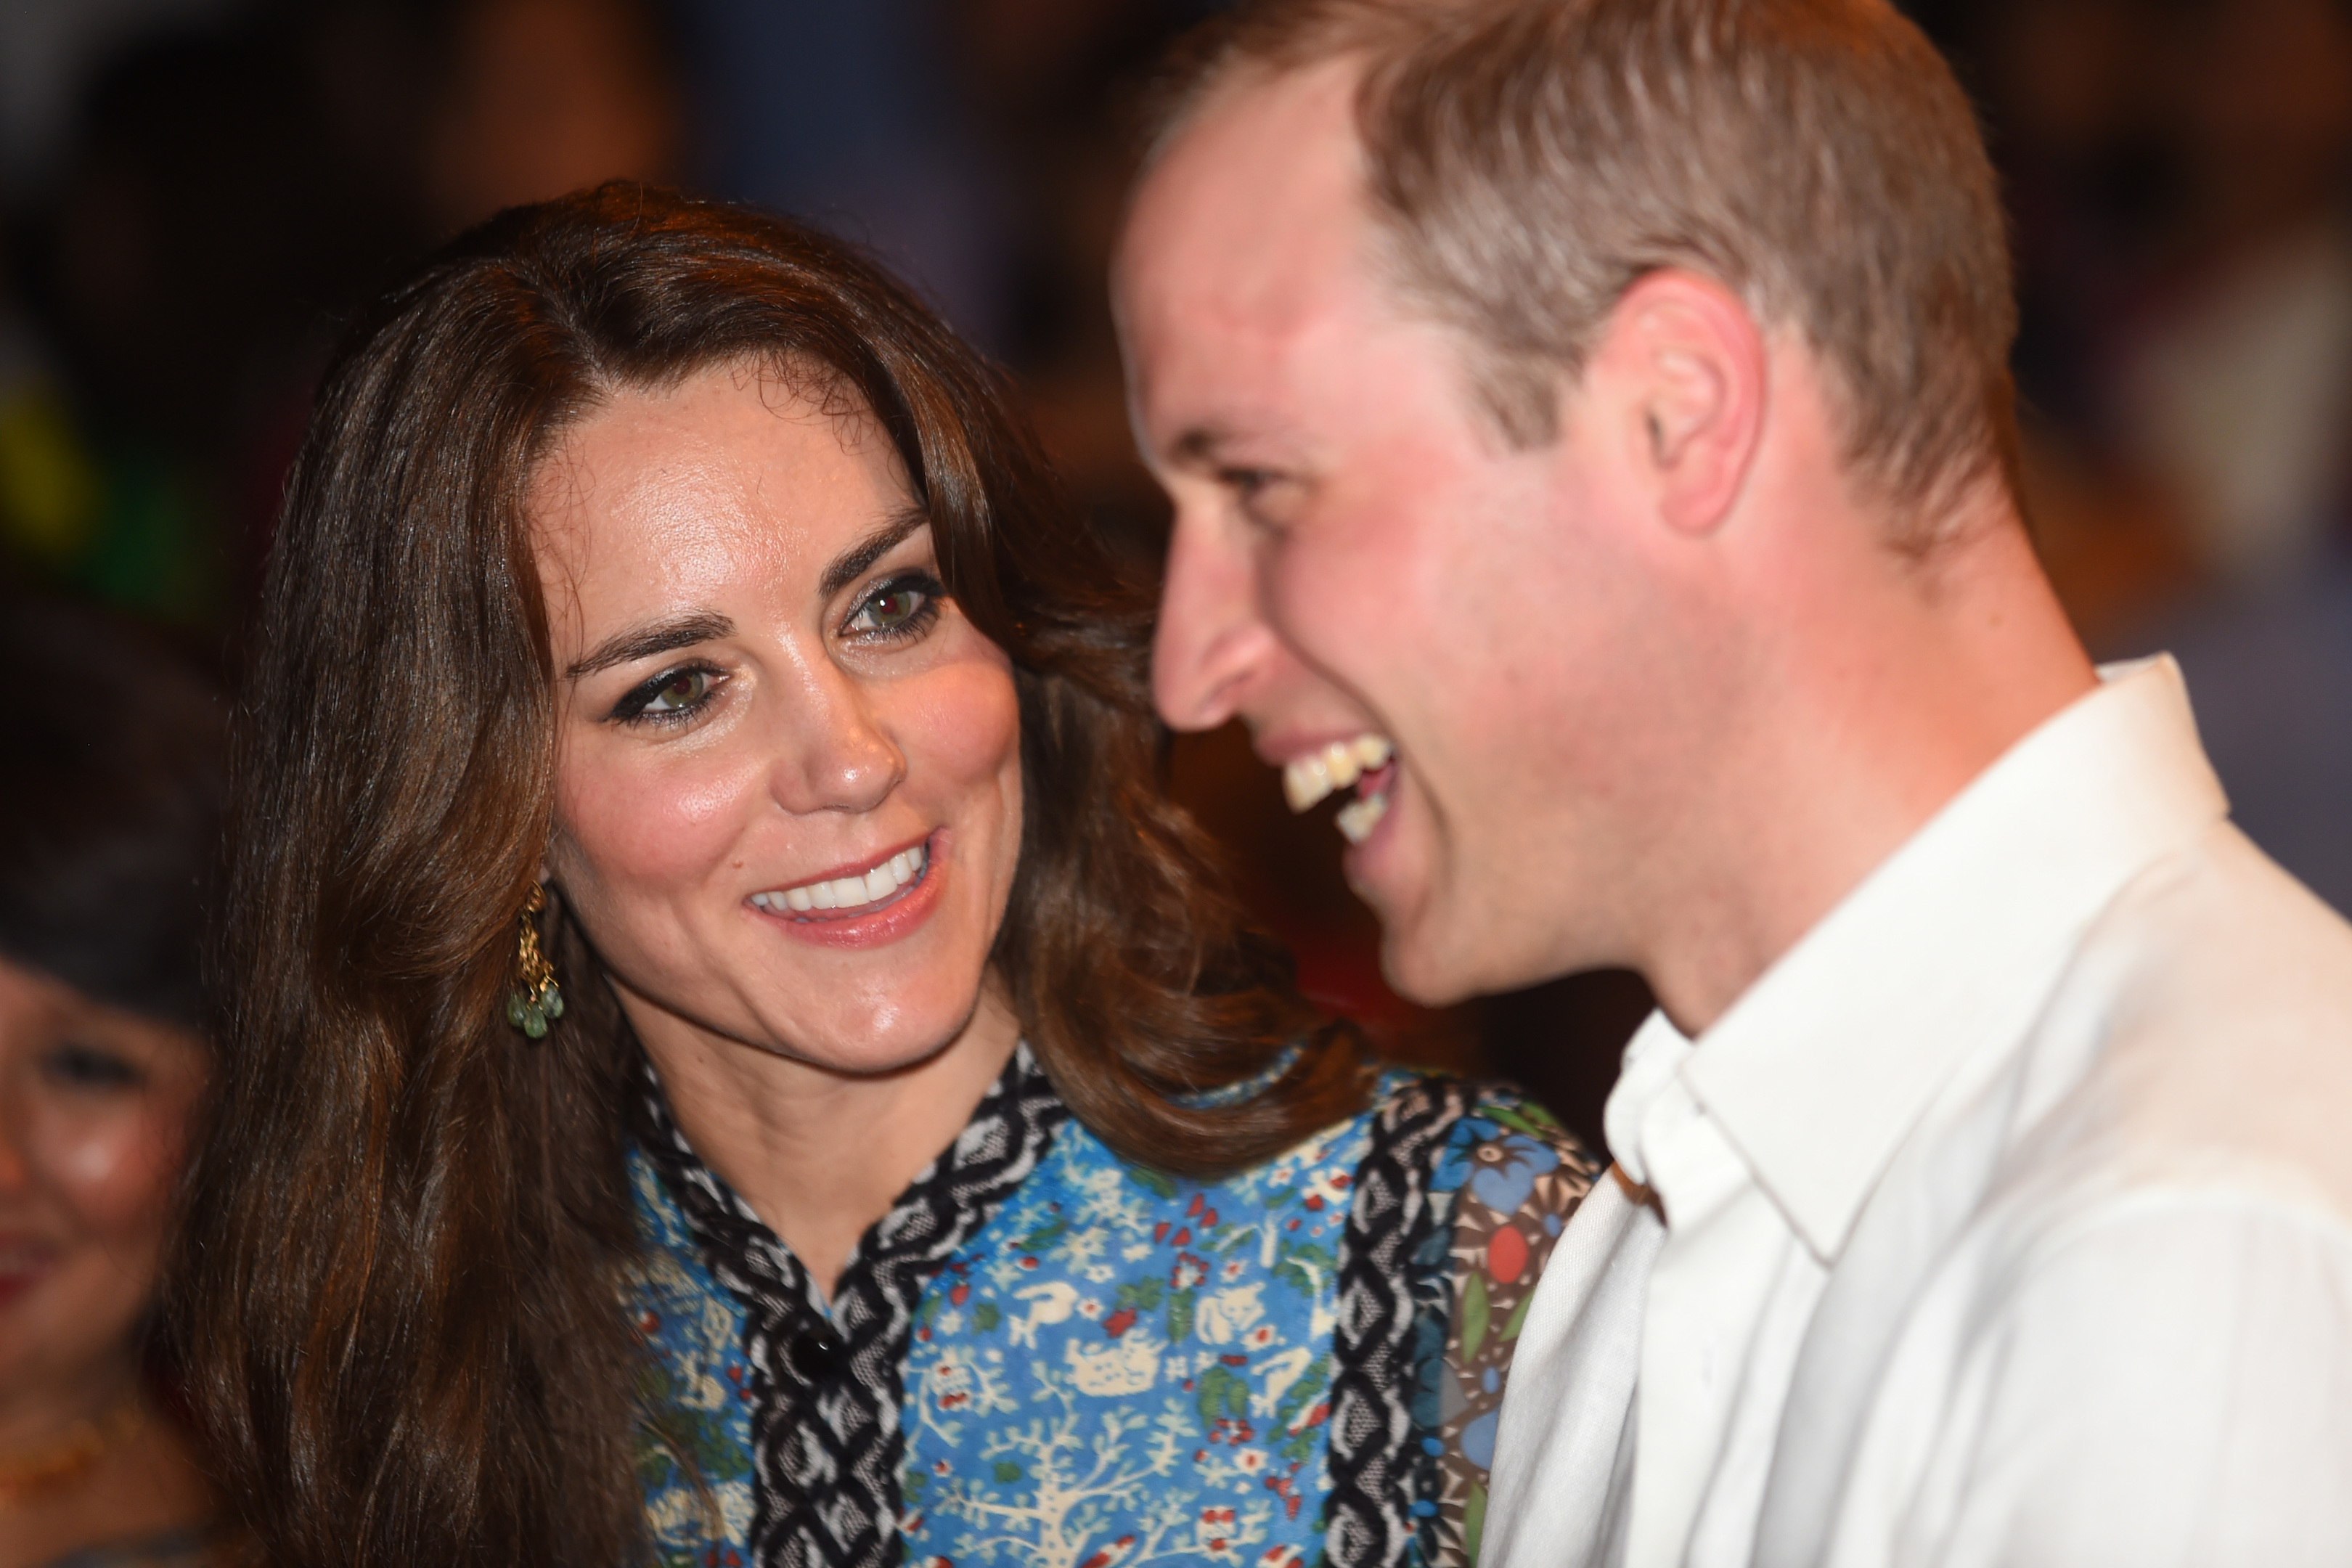 The Duke and Duchess of Cambridge during their royal visit to India.